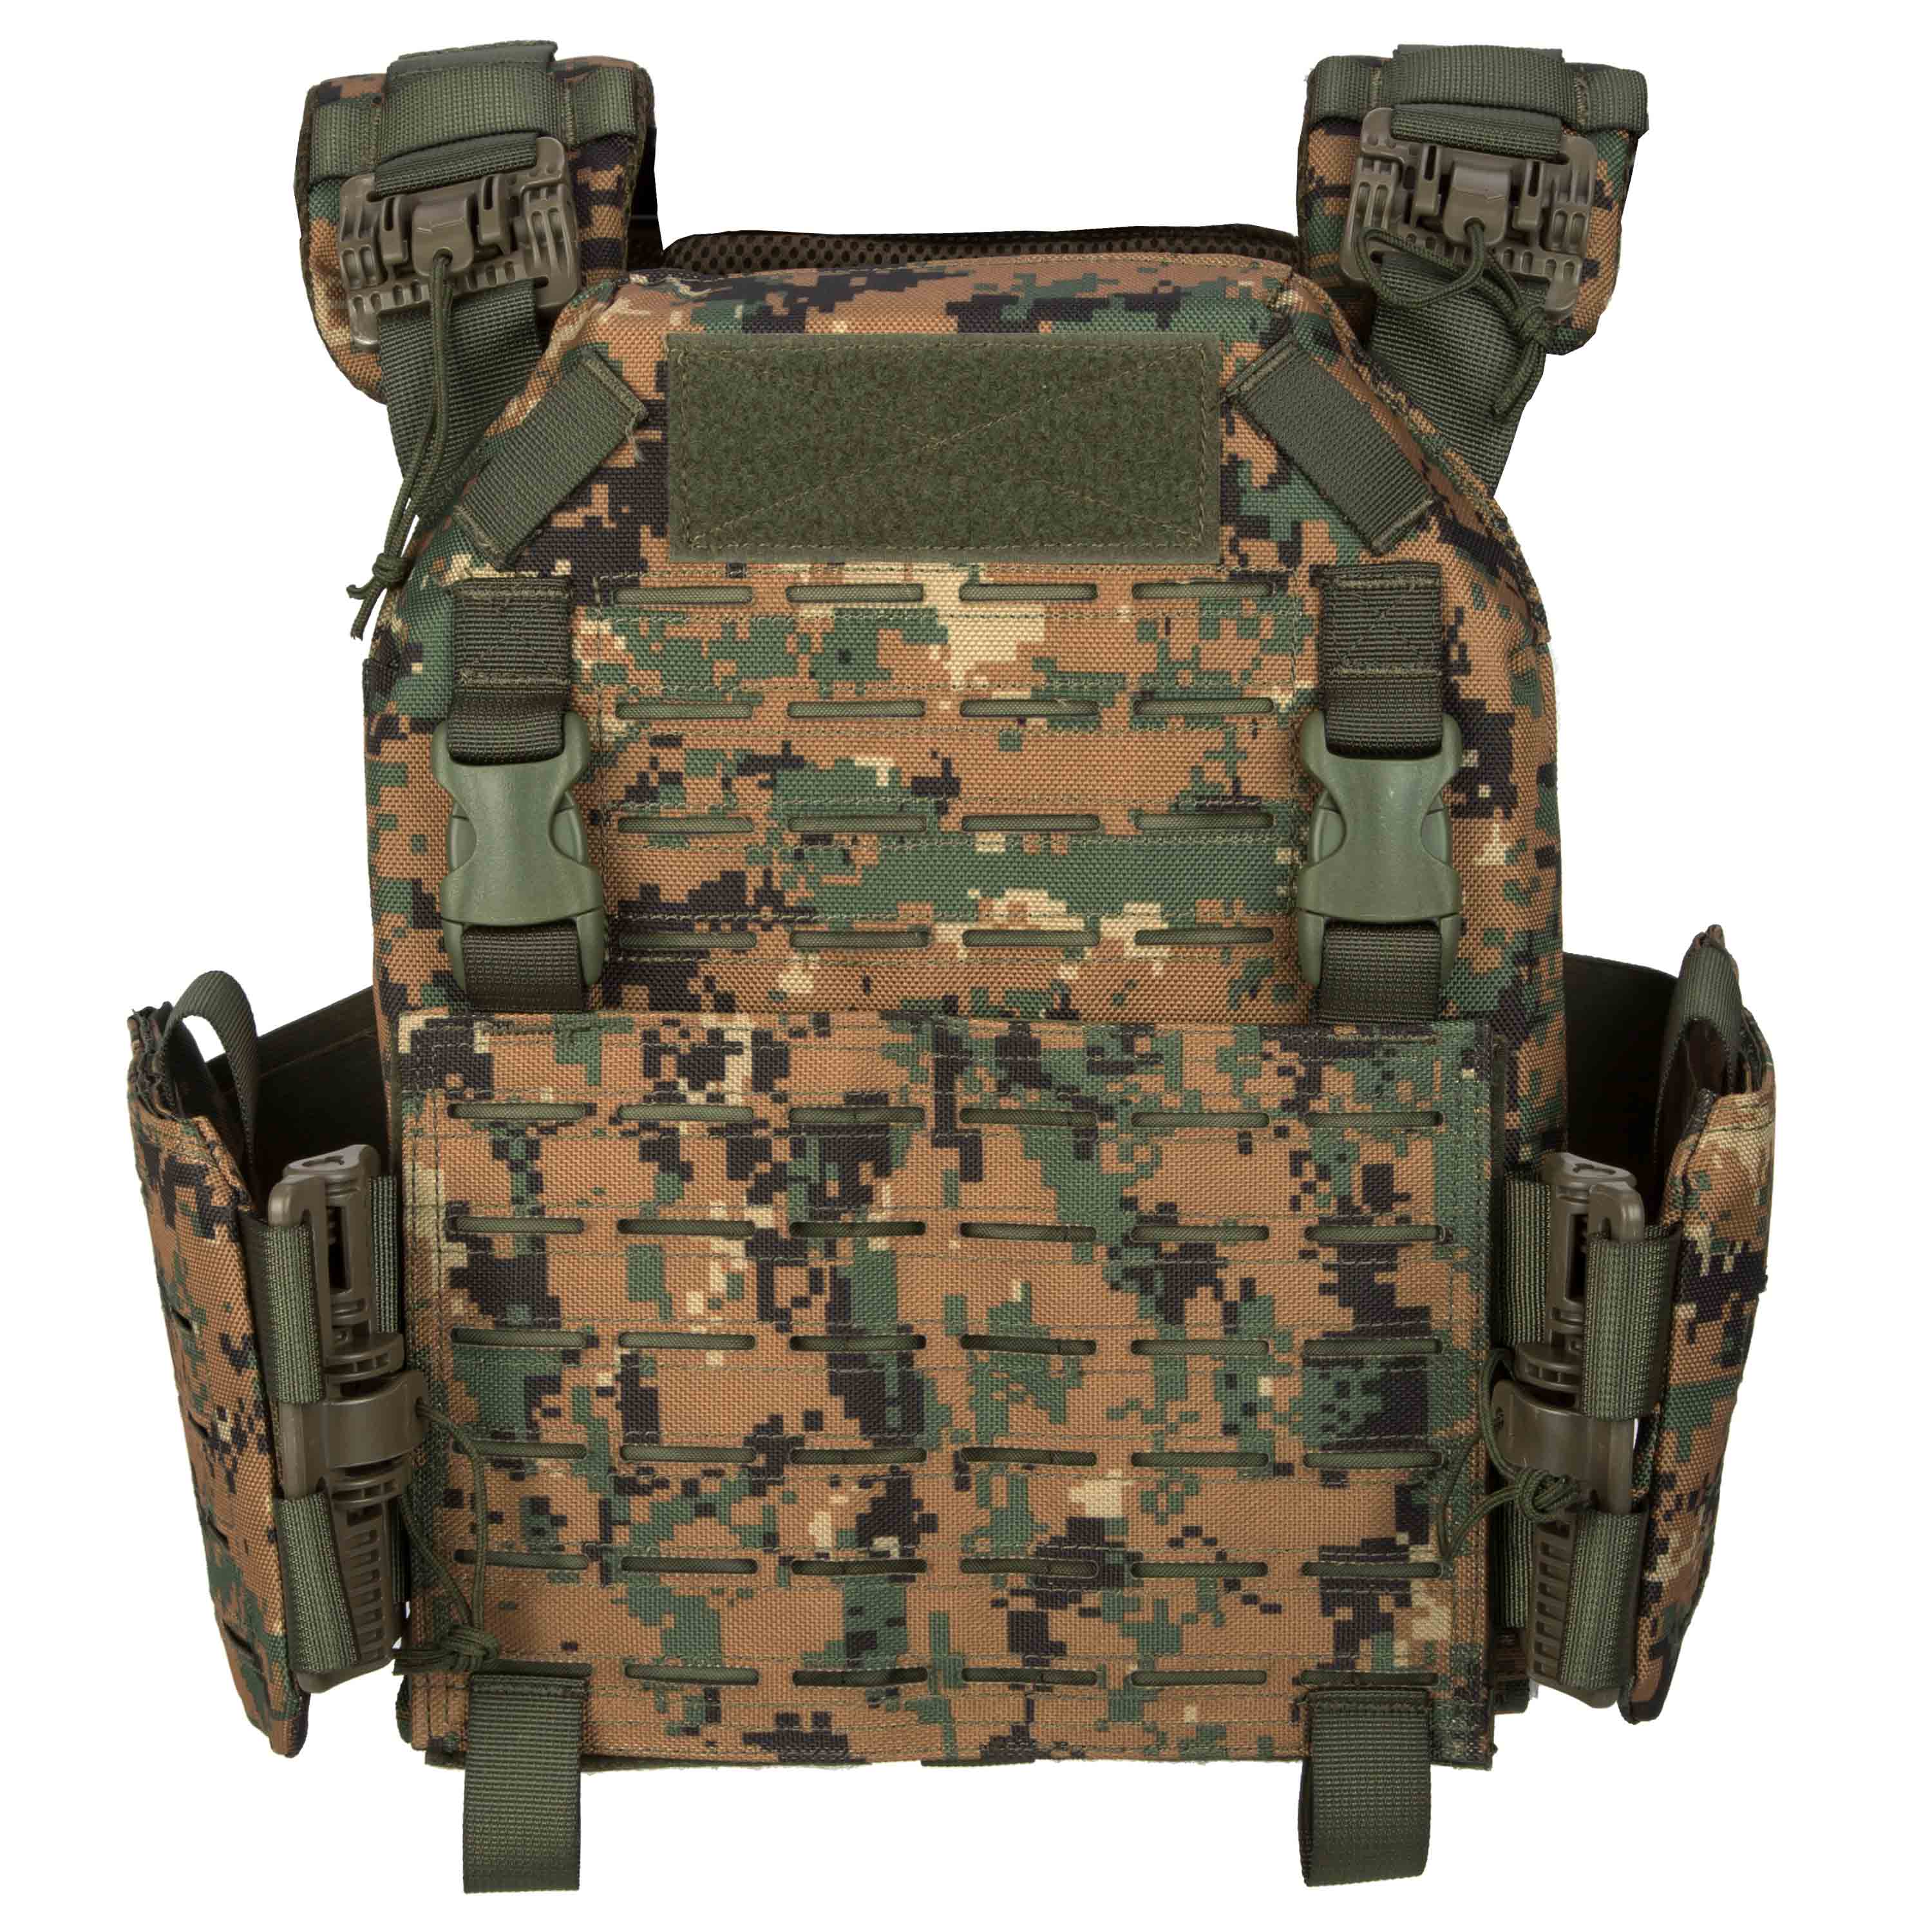 Invader Gear Airsoft Reaper Molle Plaque Carrier assault vest ATP Camouflage 